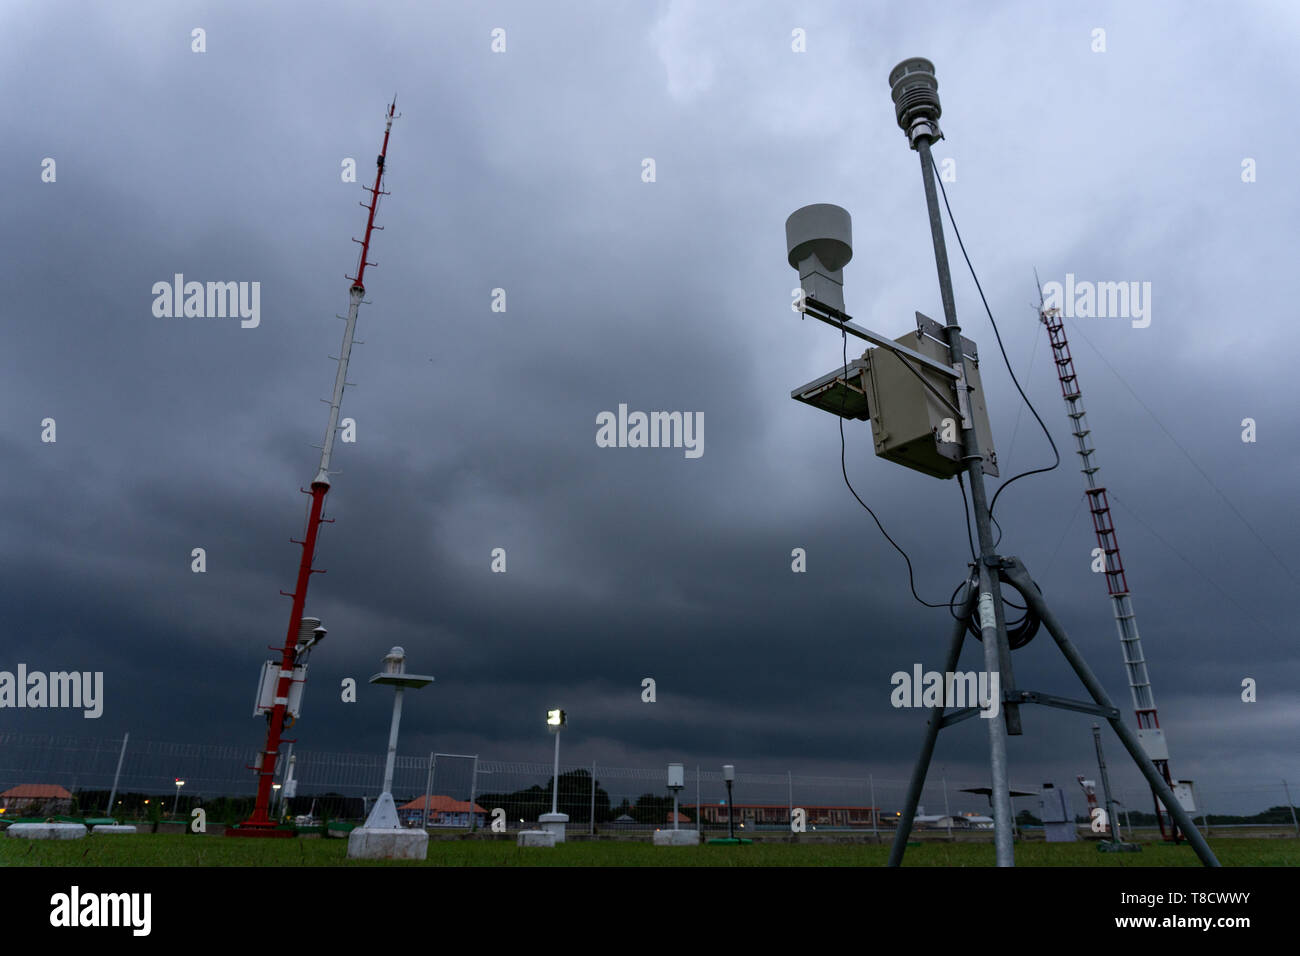 https://c8.alamy.com/comp/T8CWWY/bali-april-11-2019-a-portable-automatic-weather-station-at-ngurah-rai-airport-under-the-scary-dark-cumulonimbus-clouds-at-ngurah-rai-airport-T8CWWY.jpg